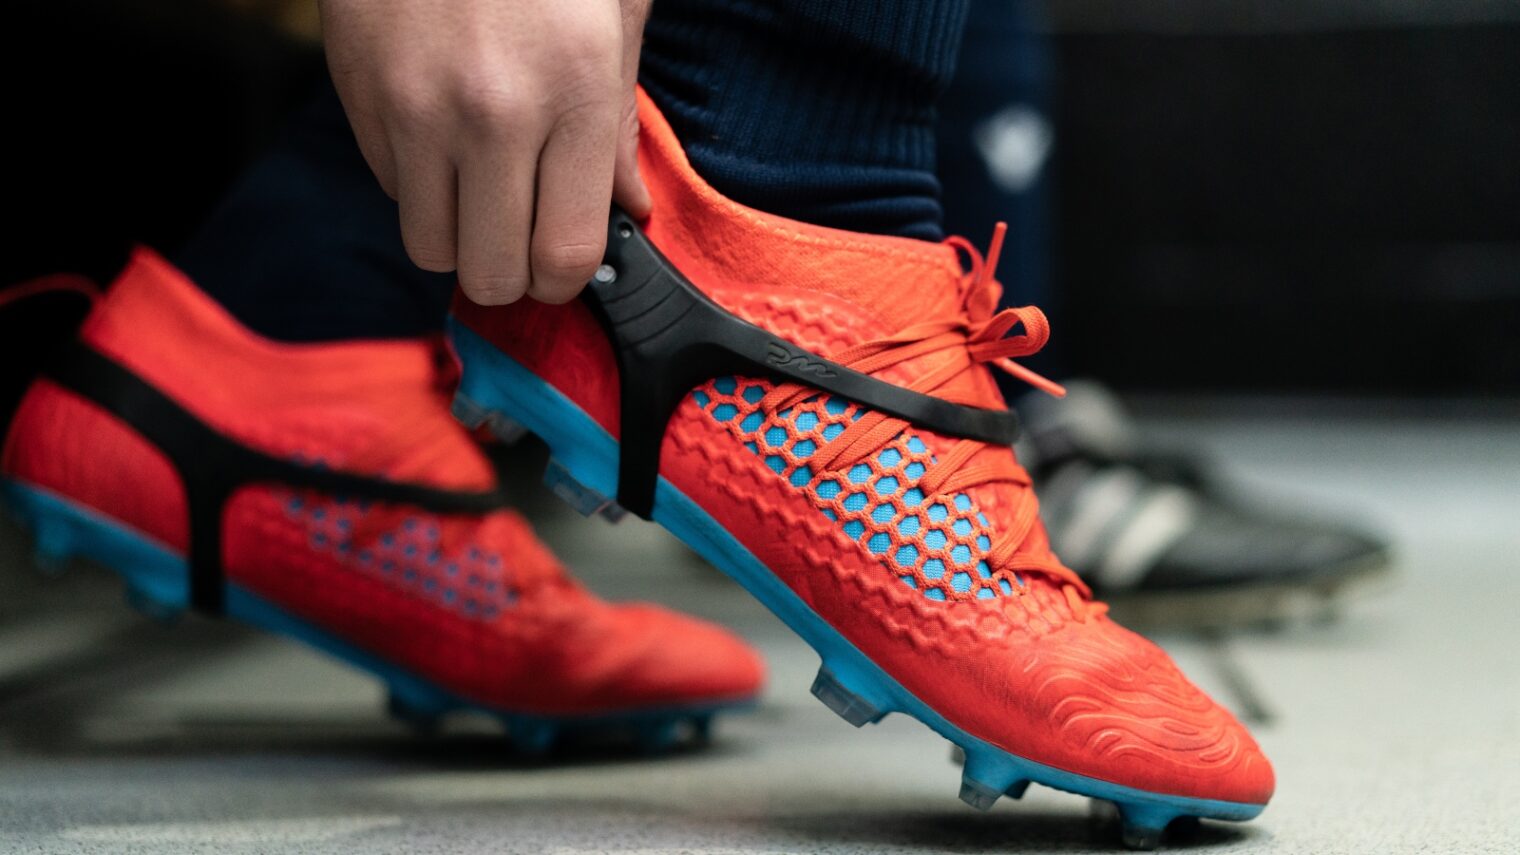 PlayerMaker’s sensor device attaches to a soccer player’s shoes. Photo: courtesy